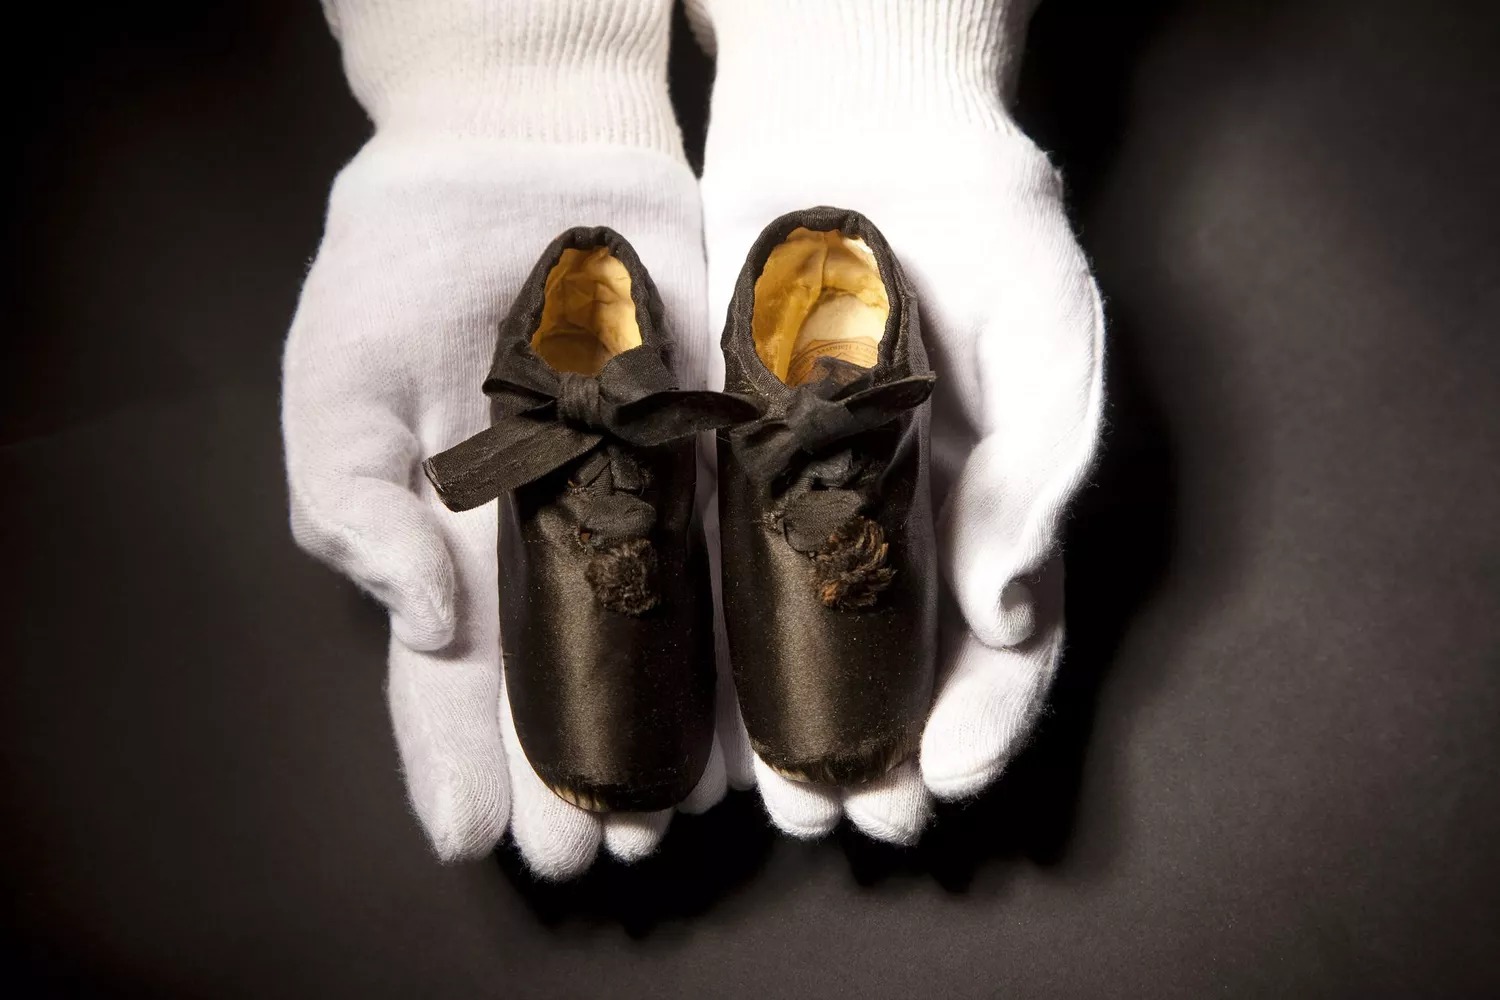 Princess Victoria’s first baby shoes. 